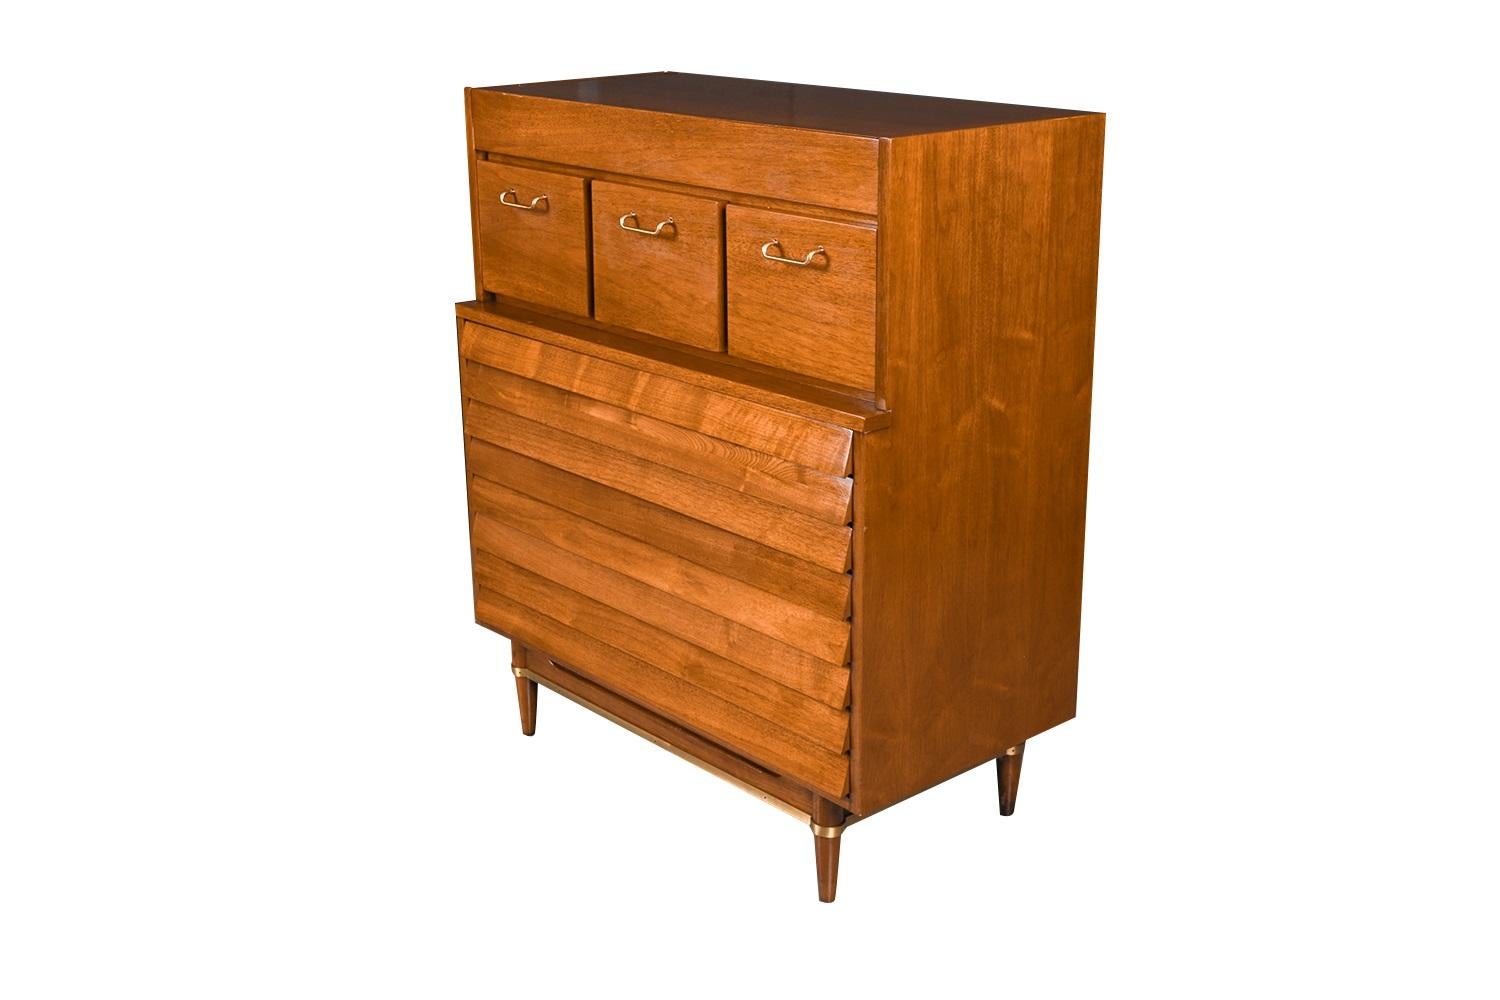 This exceedingly well-crafted American of Martinsville louvered slat front drawer highboy tall dresser was designed by Merton Gershun for his Dania collection. Features the mid-century style and construction quality that keep these pieces in such